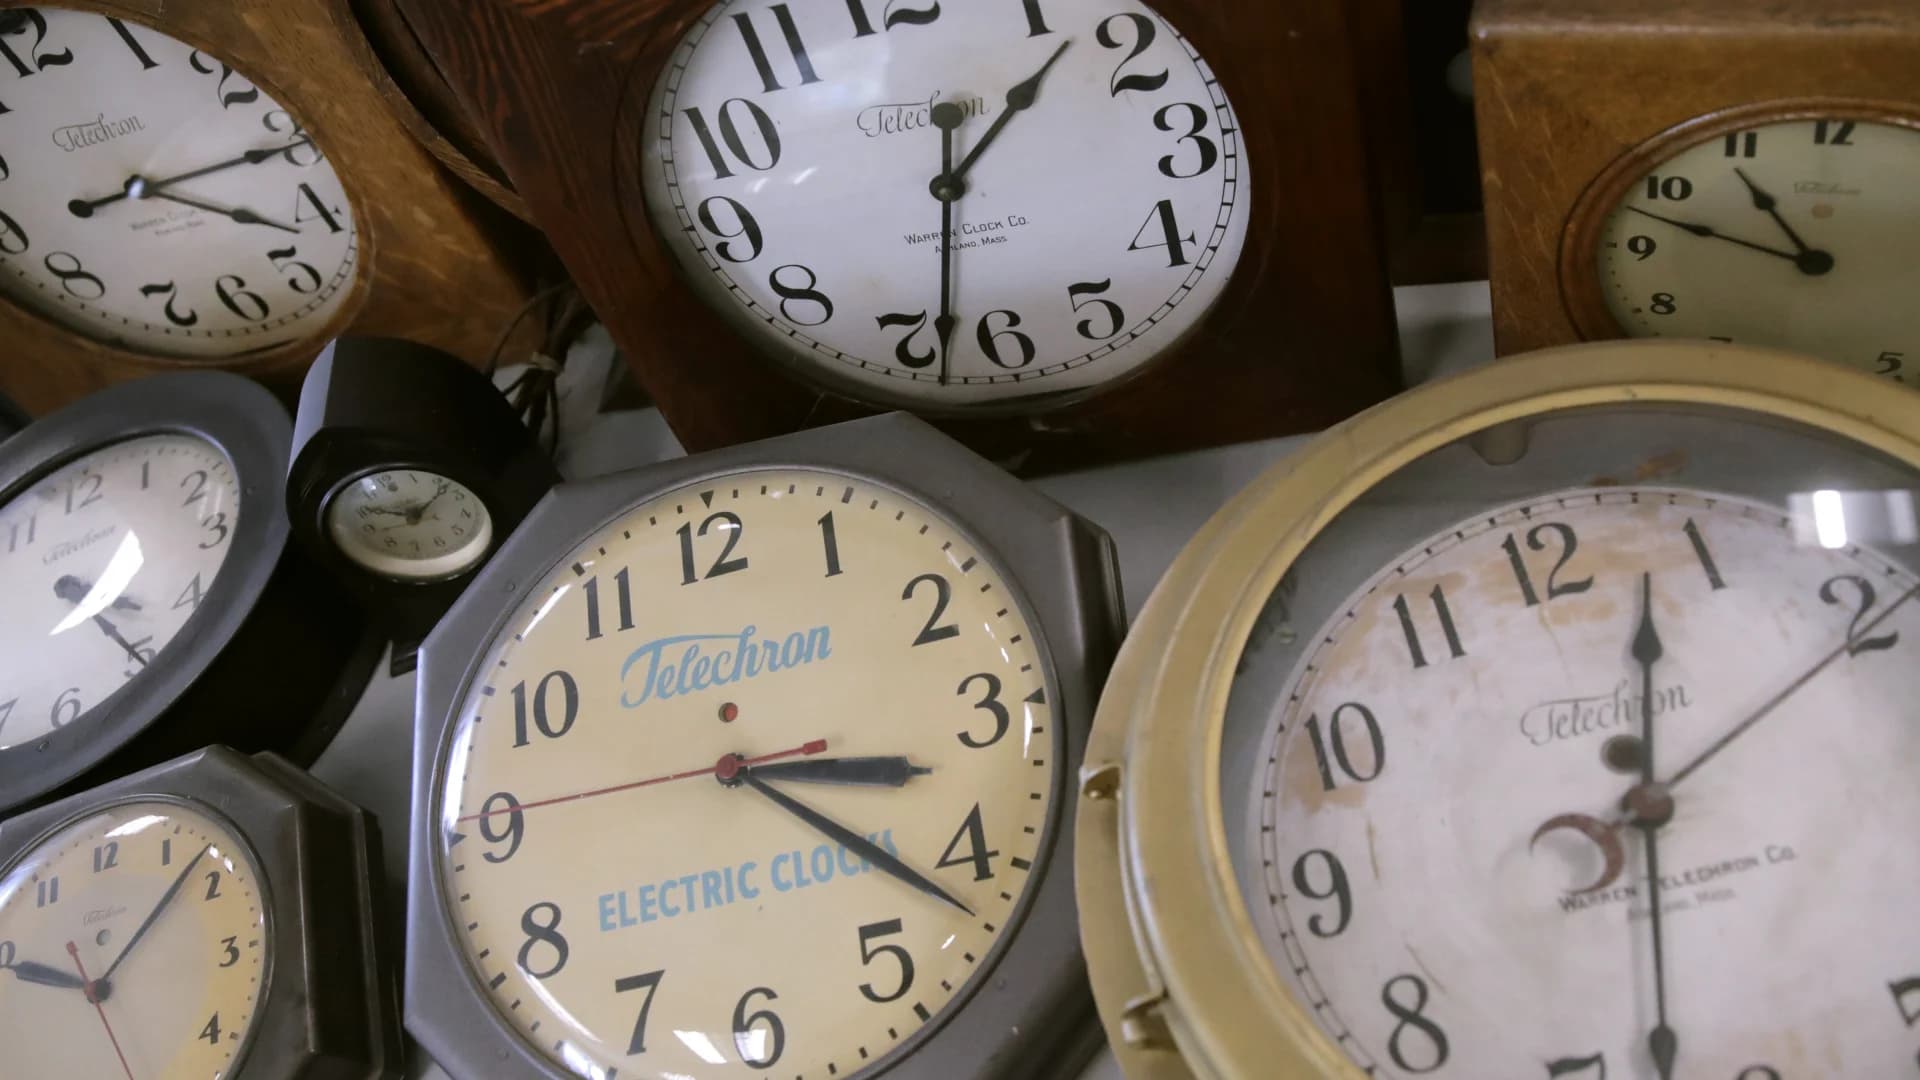 QUIZ: How much do you know about daylight saving time?